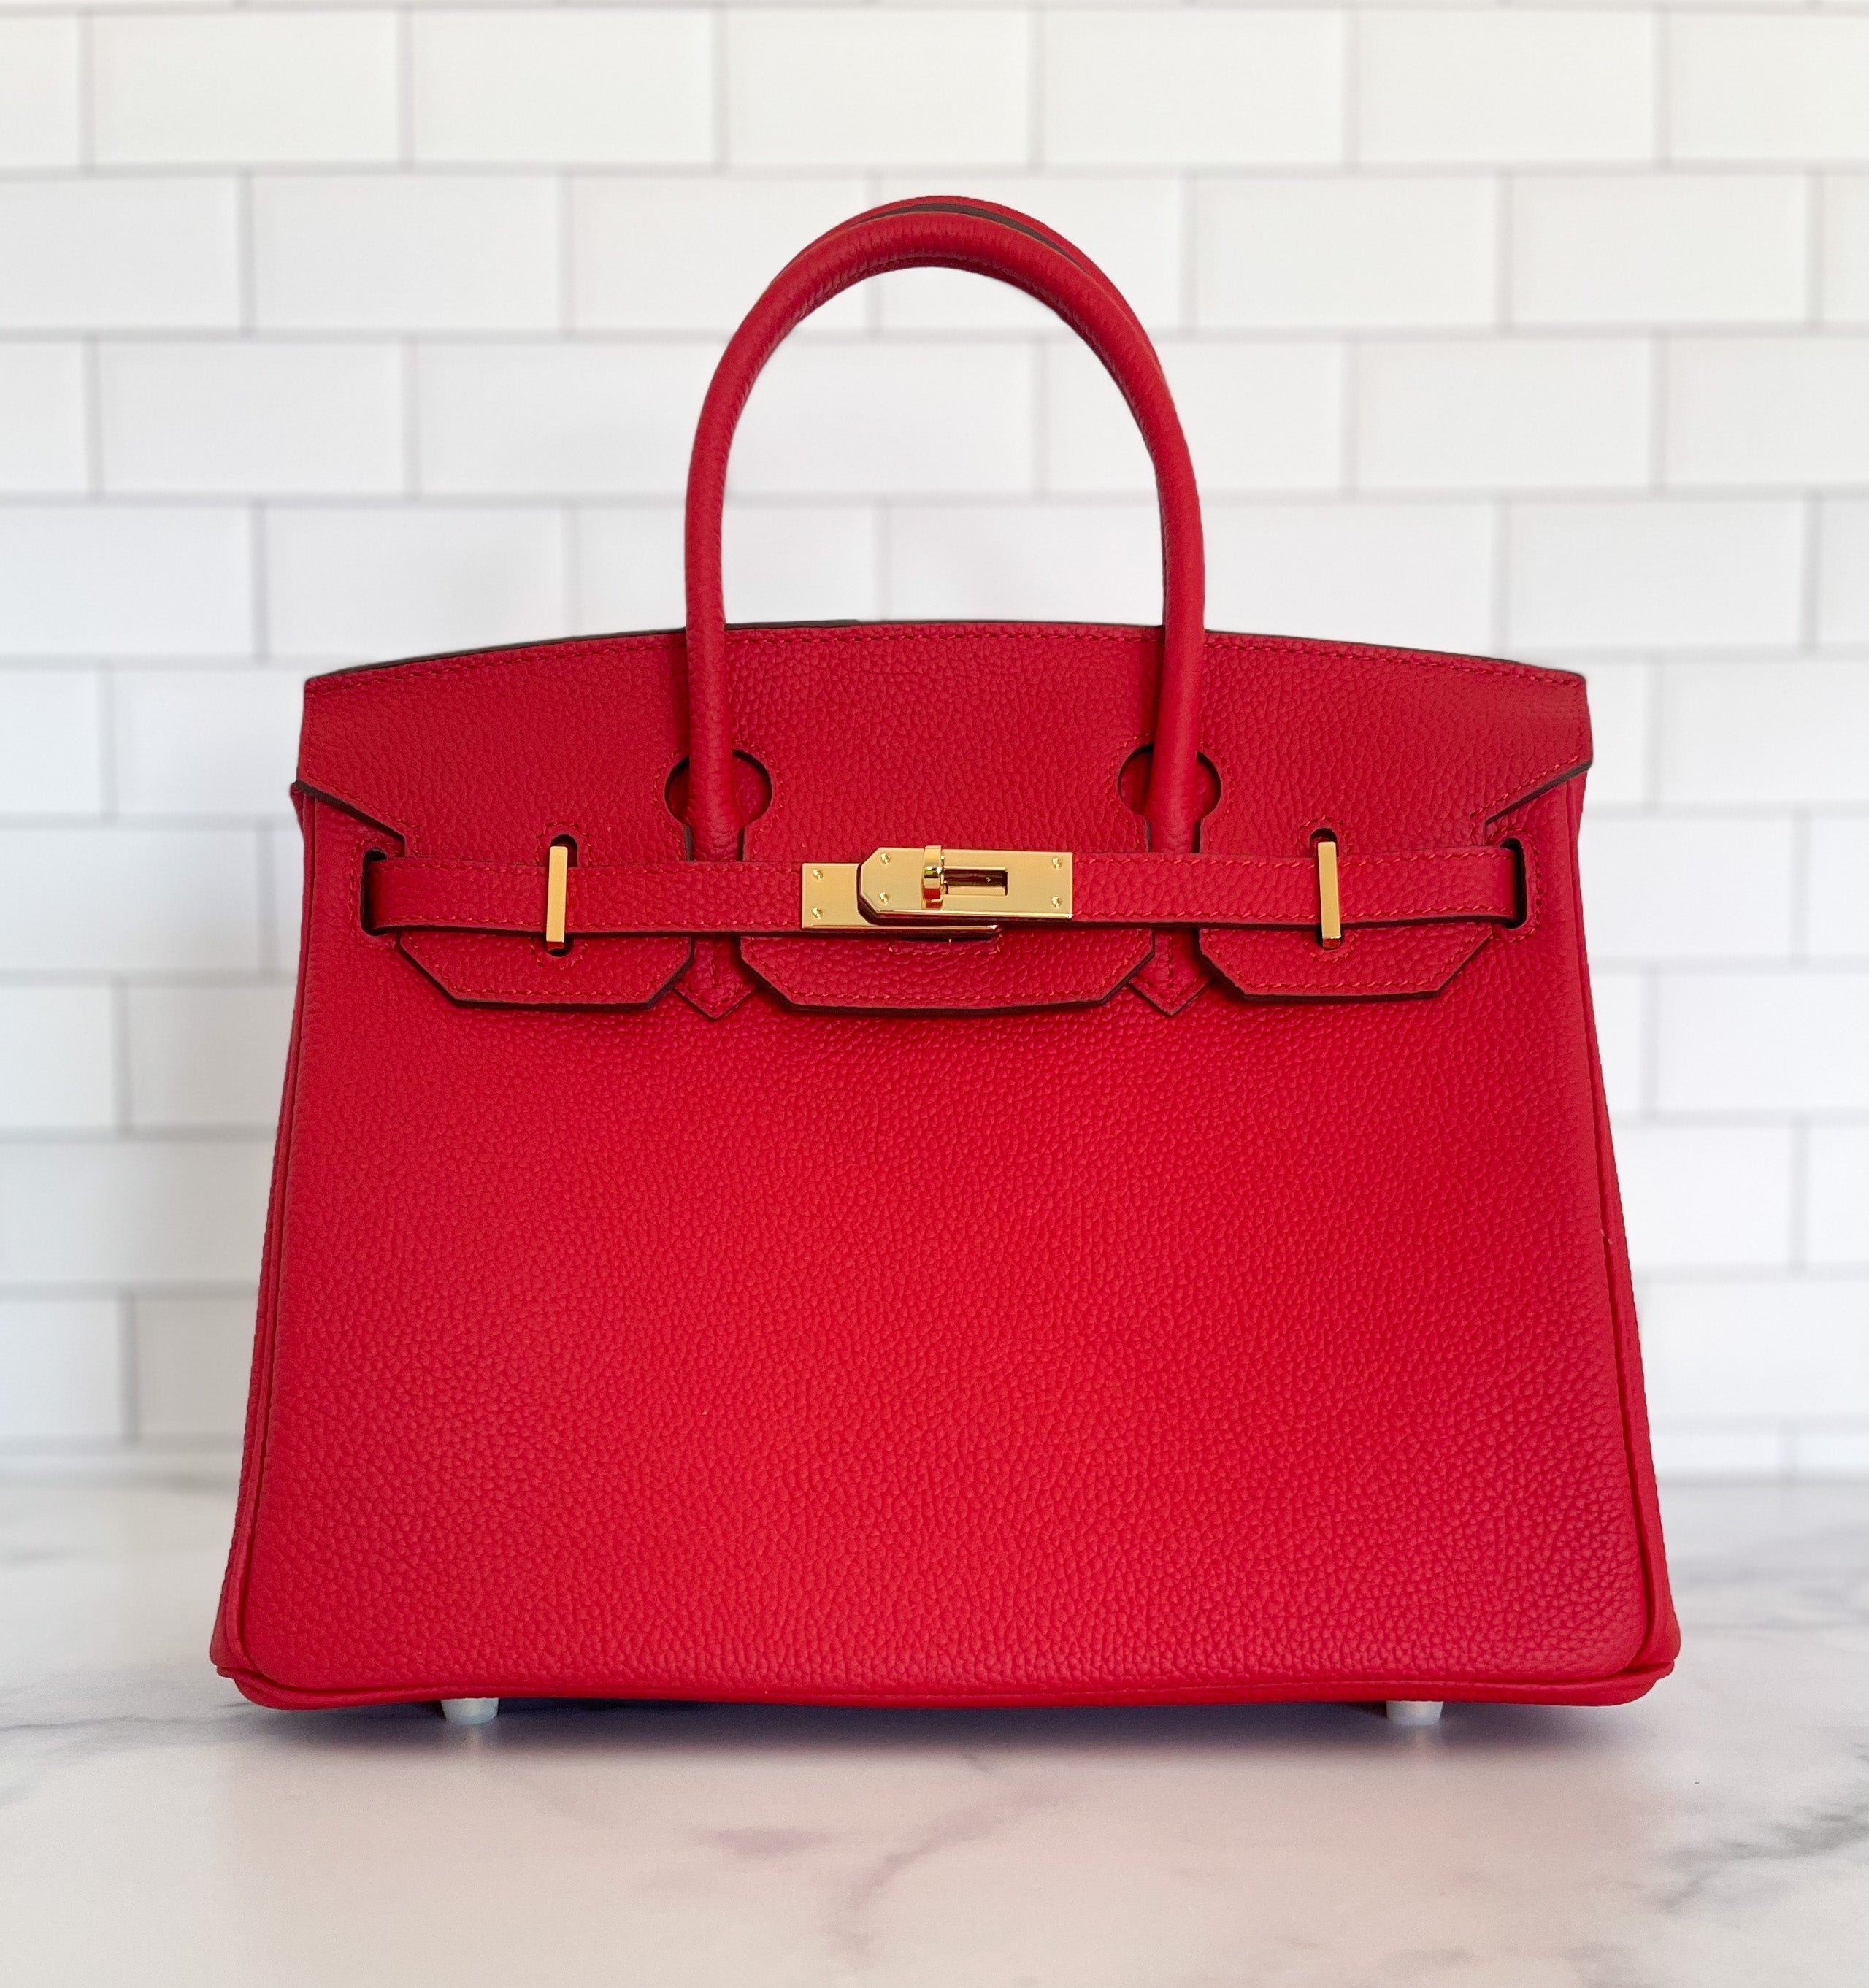 Elegant Leather Handbag: The Perfect Accessory for Every Occasion